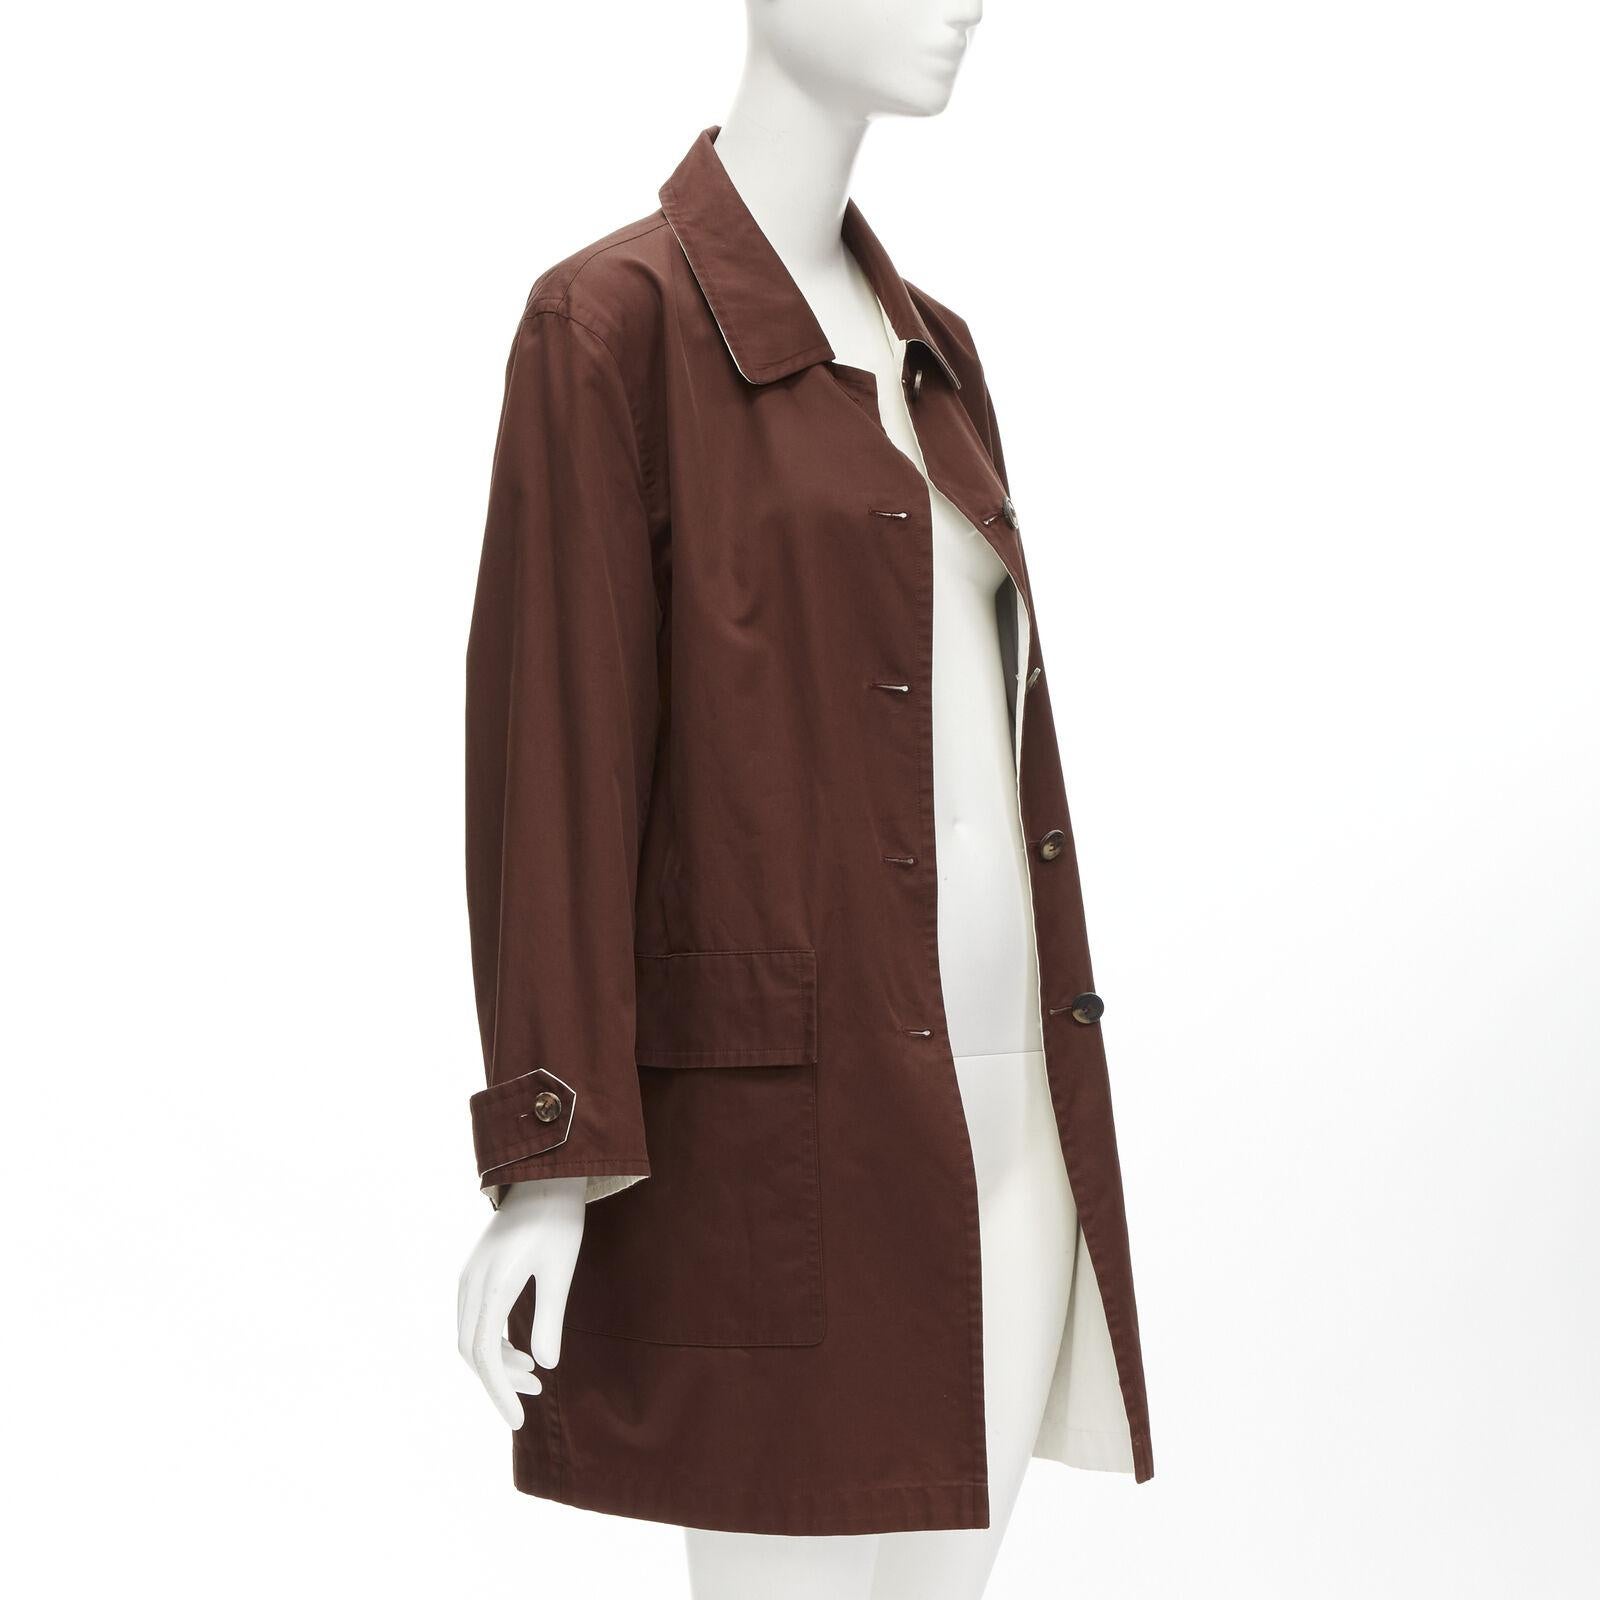 HERMES MARTIN MARGIELA Vintage Reversible brown ivory cotton overcoat FR38 M
Reference: TGAS/C01611
Brand: Hermes
Designer: Martin Margiela
Material: Cotton
Color: Brown, Beige
Pattern: Solid
Closure: Button
Lining: Cotton
Extra Details: